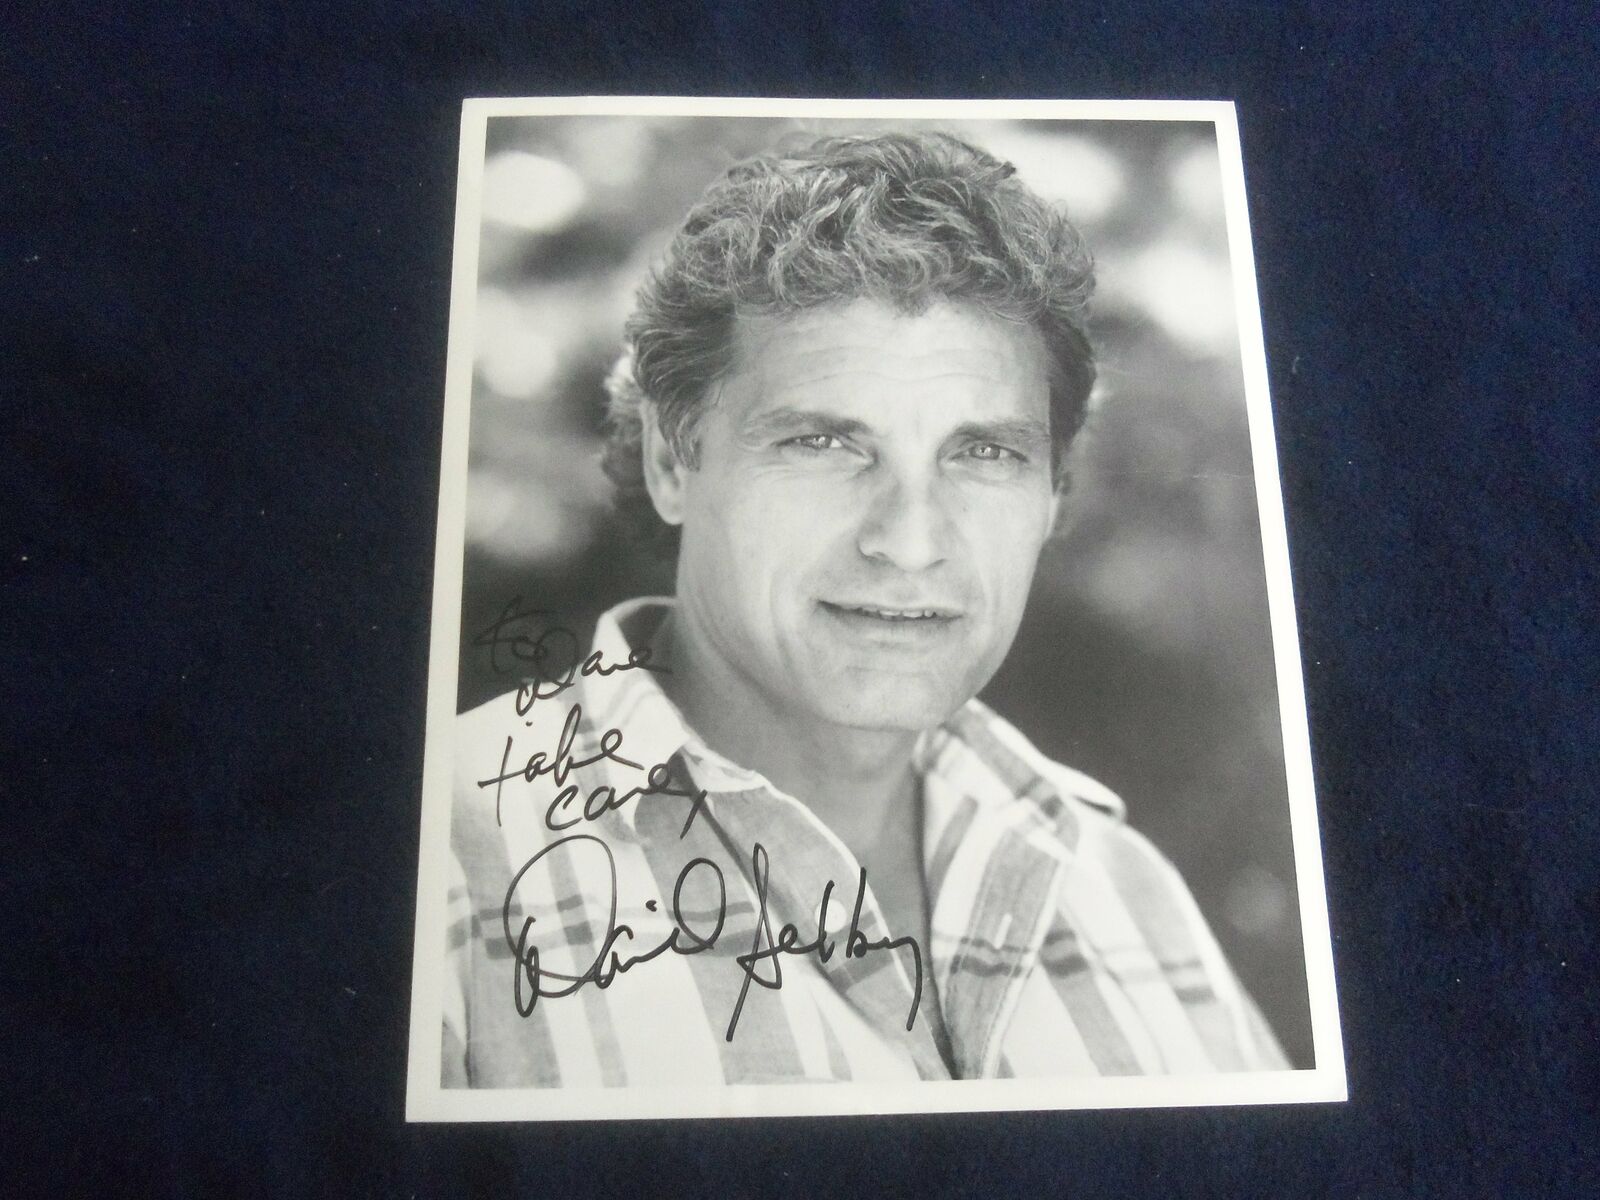 DAVID SELBY 8x10 AUTOGRAPHED PHOTOGRAPH